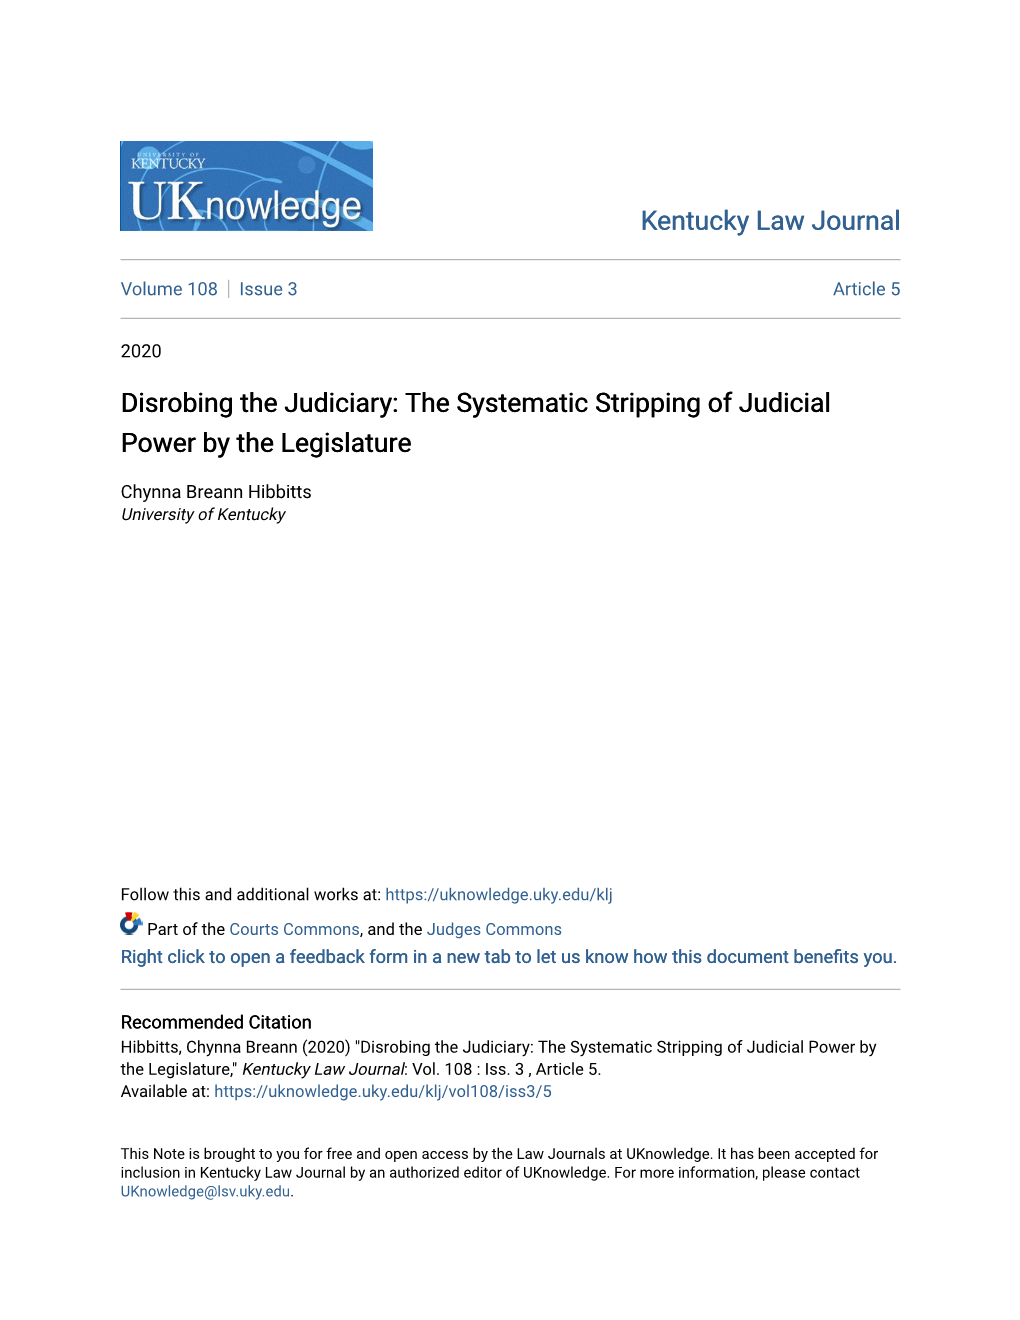 Disrobing the Judiciary: the Systematic Stripping of Judicial Power by the Legislature